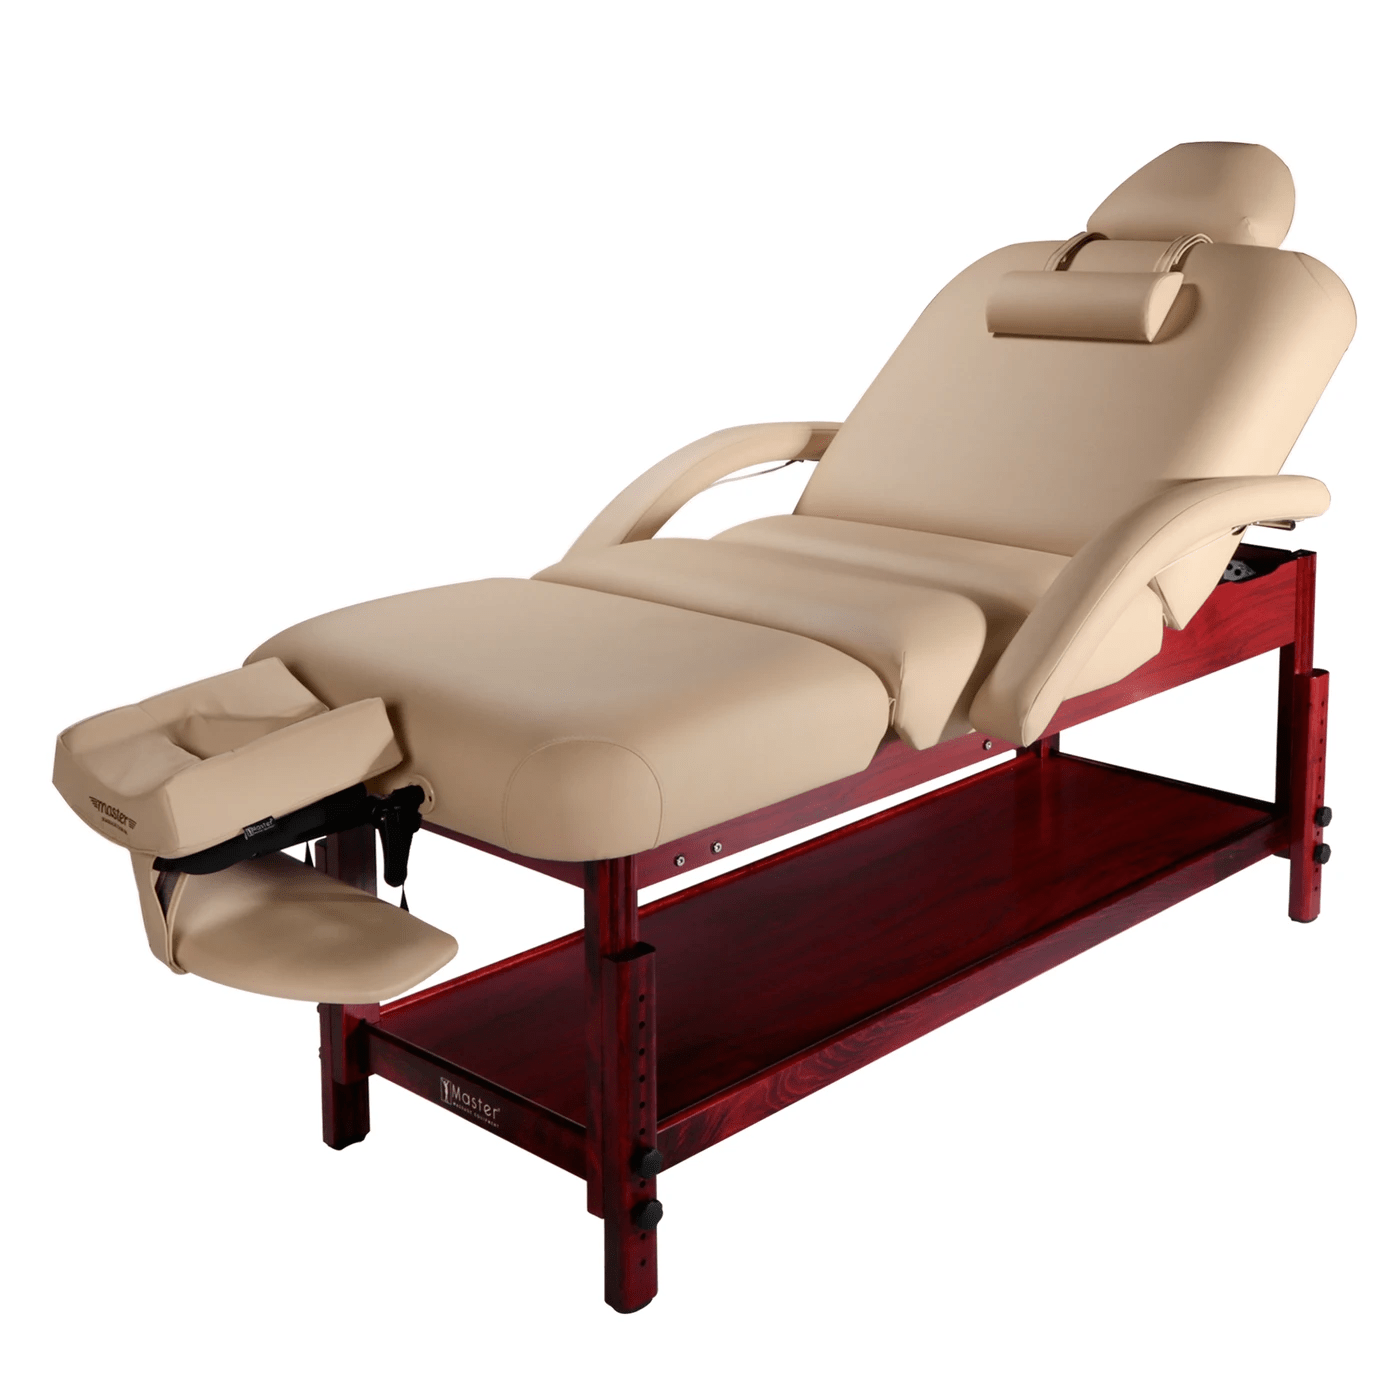 Master Massage Claudia 30" Spa Salon Beauty Bed with Pneumatic Tilt Stationary Massage Table 10126